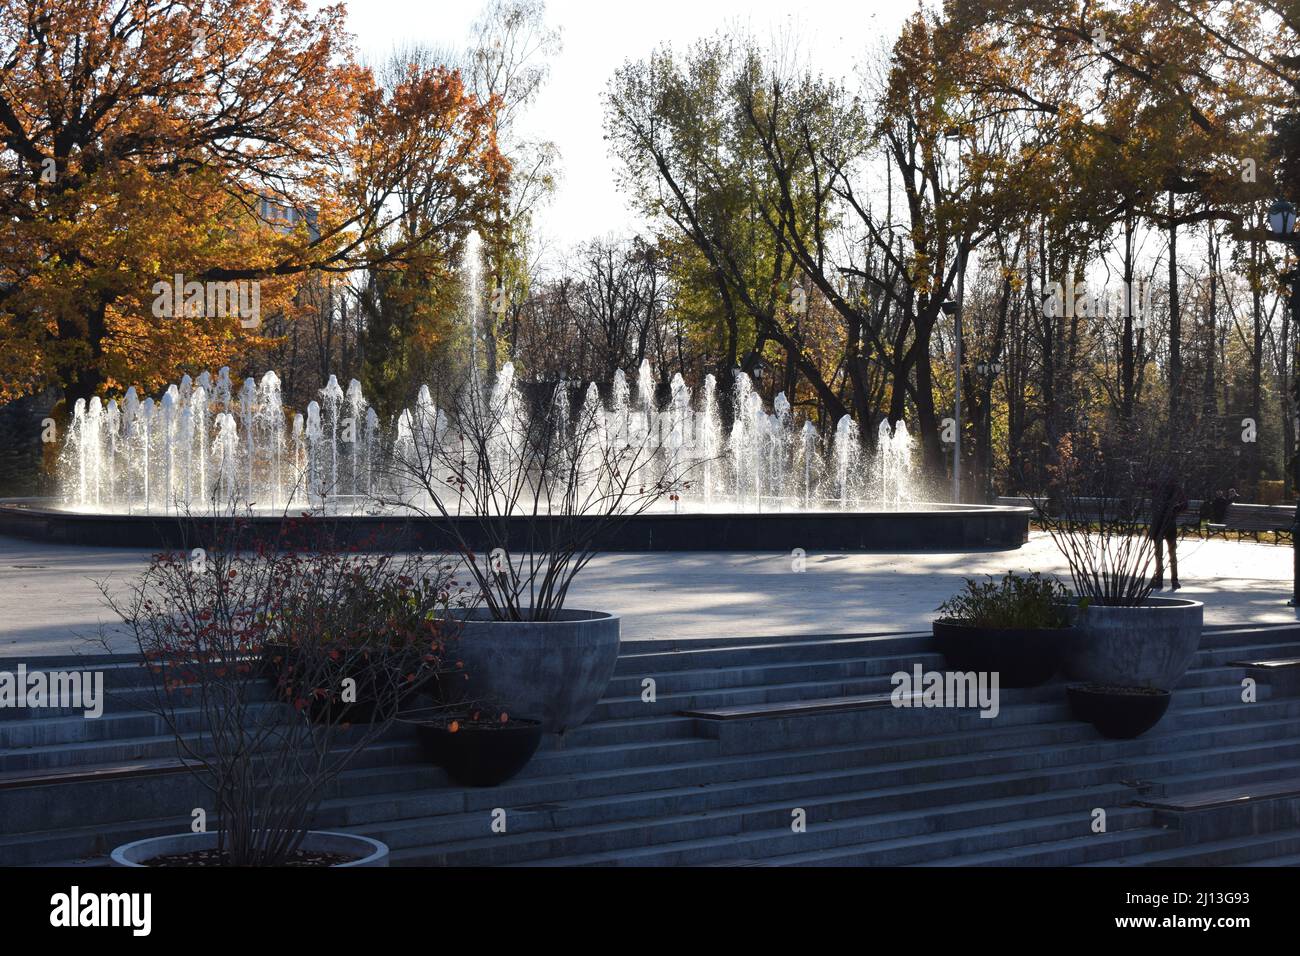 Kharkov, Ukraine. 2021, October 26. Jets of decorative fountain in the park at autumn foliage in the backlight. Selective focus. Movement of water jet Stock Photo